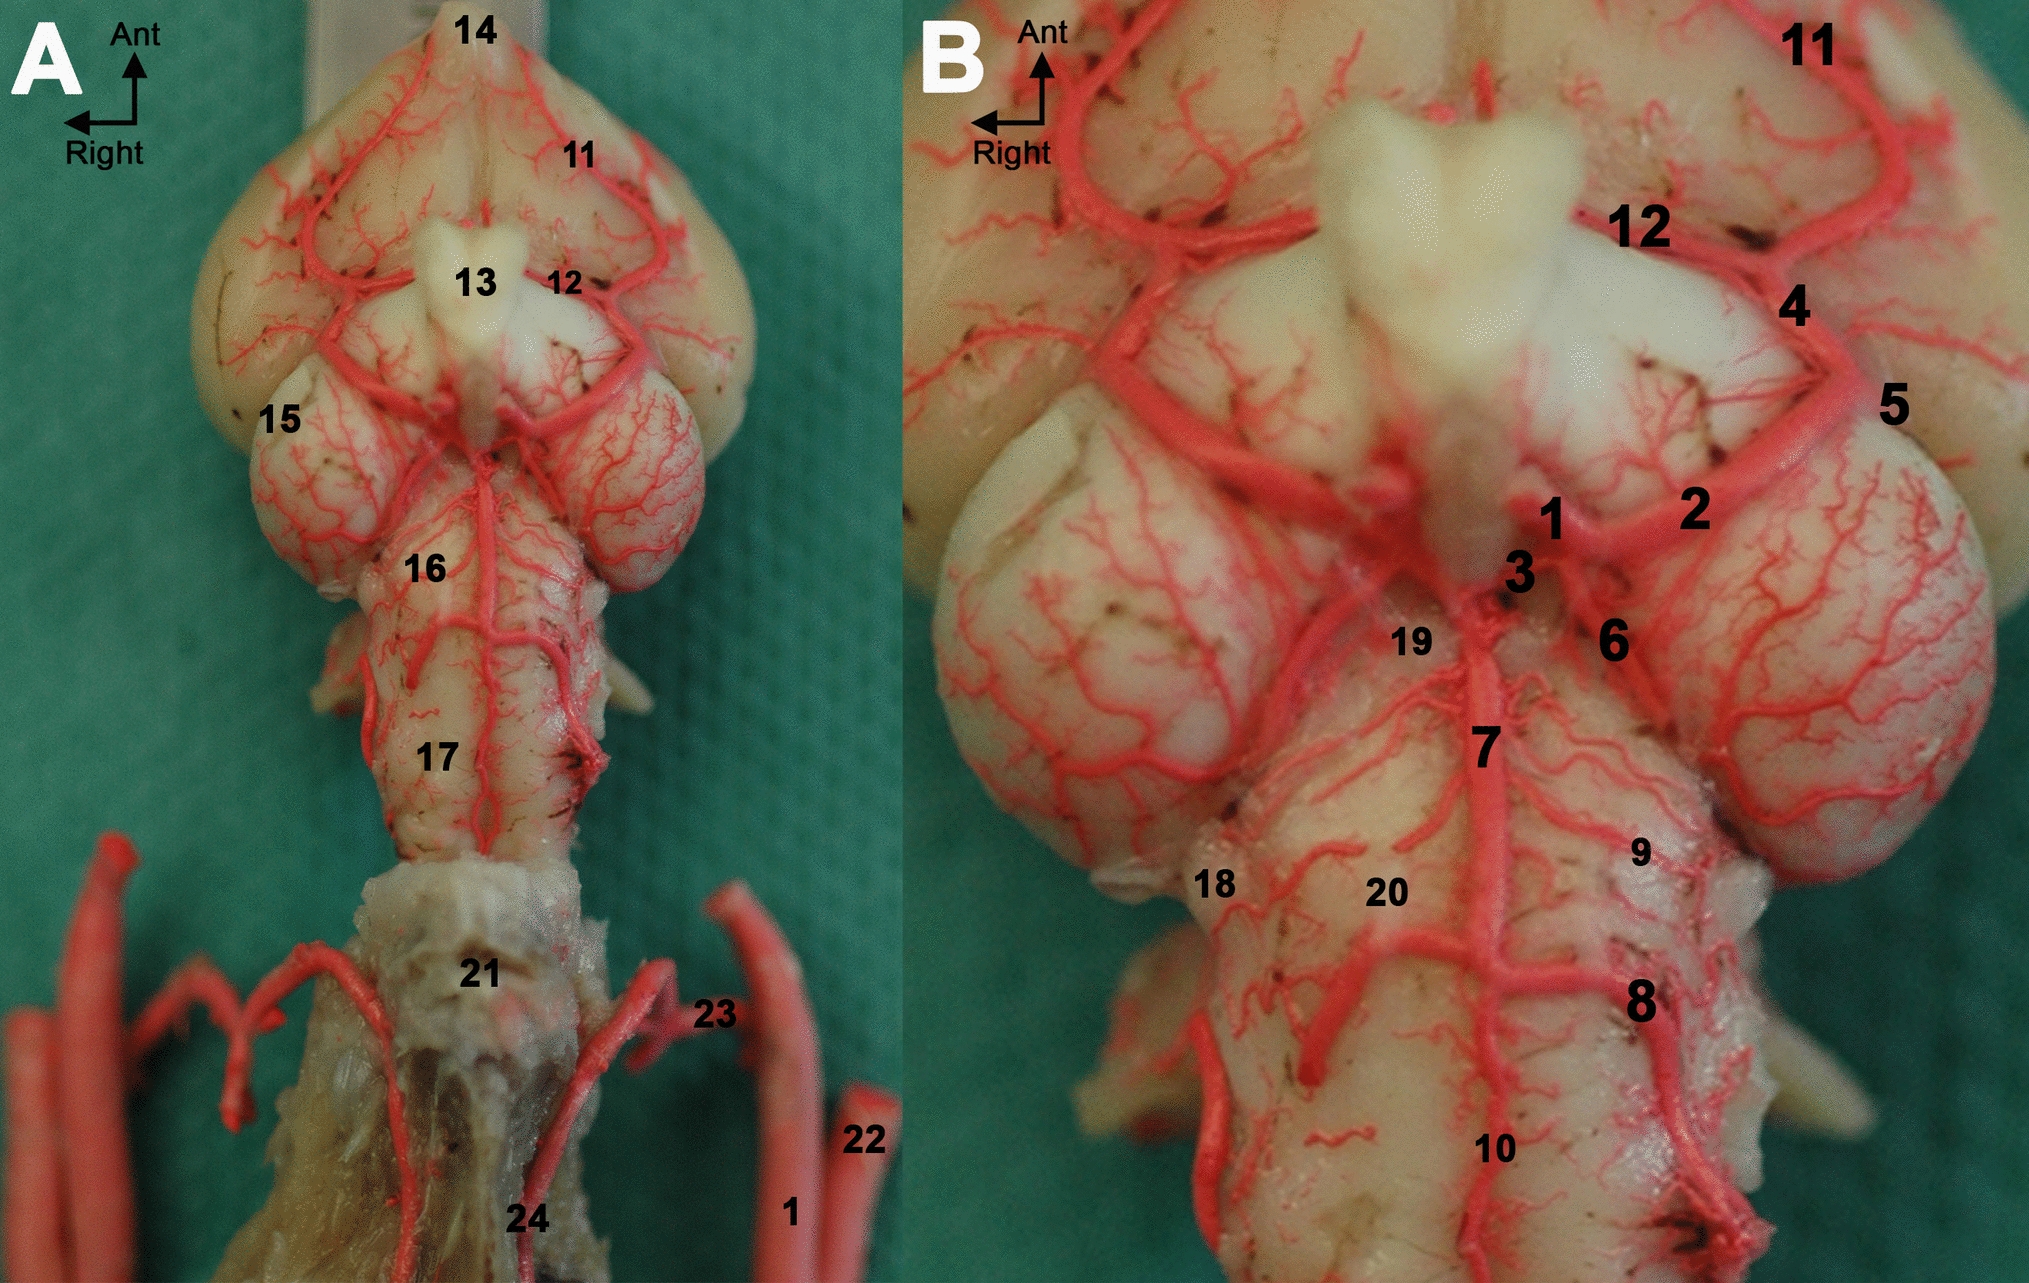 Composition of encephalic arteries and origin of the basilar artery are different between vertebrates